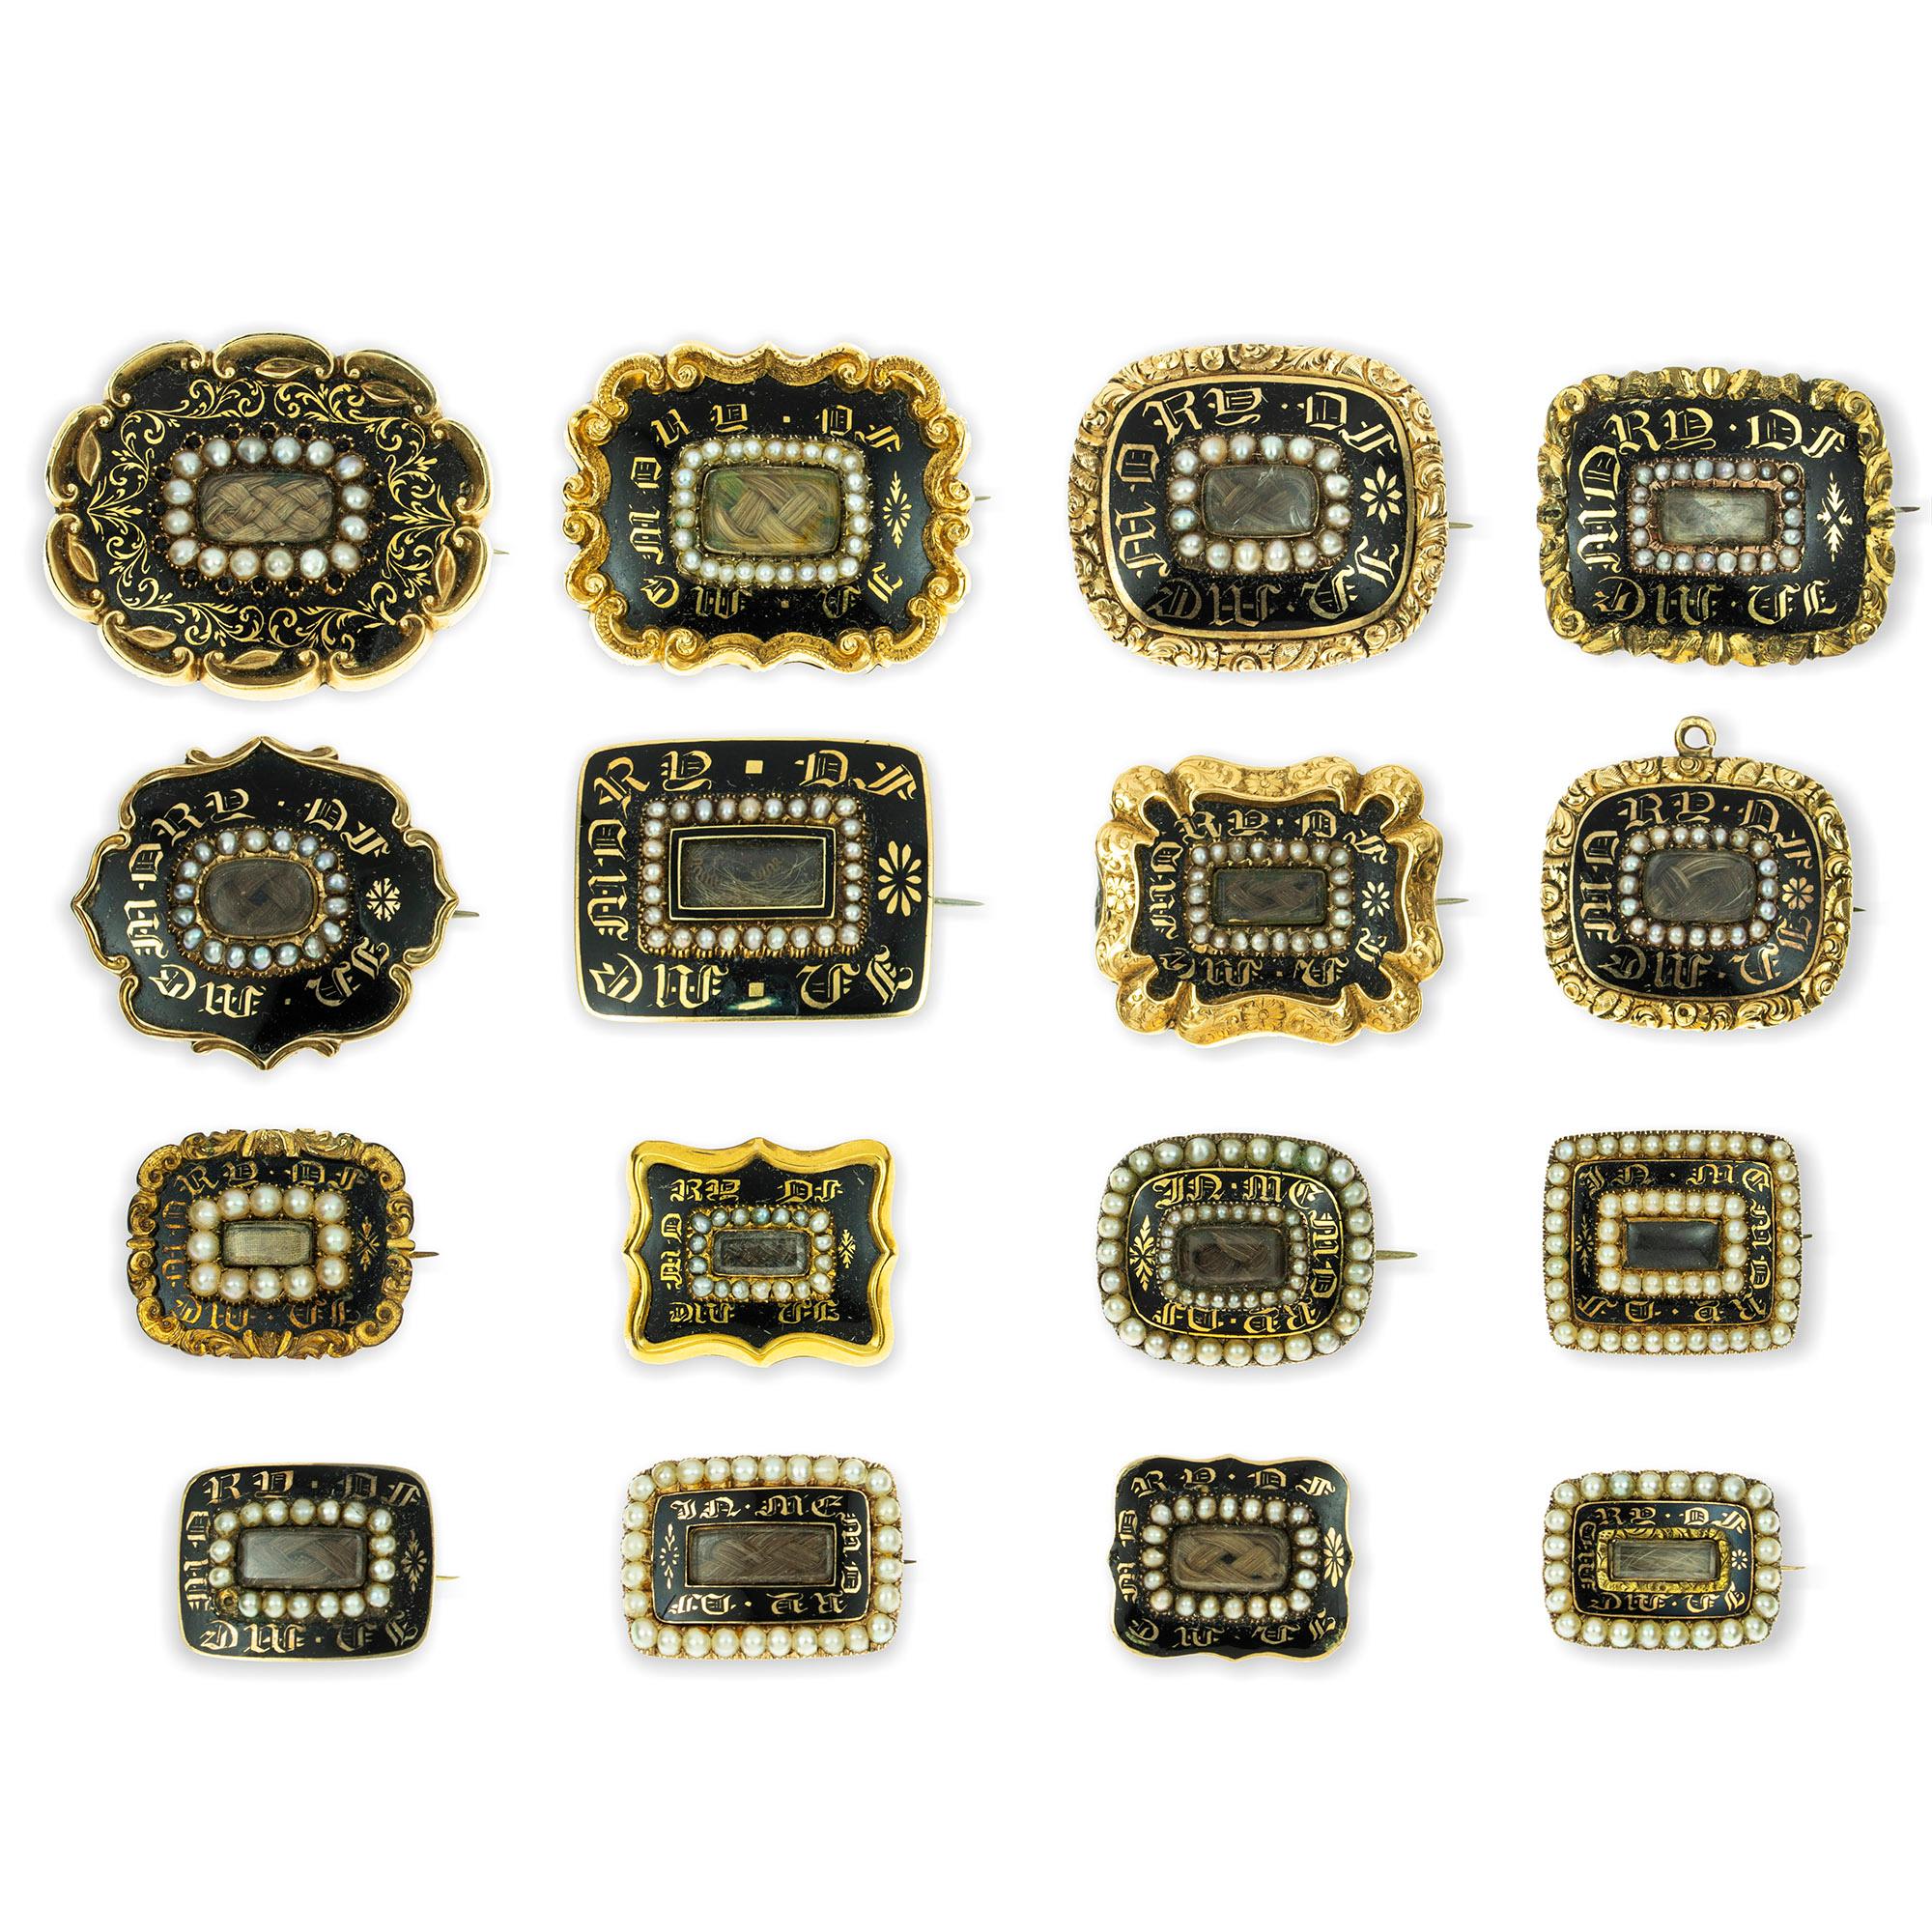 A collection of sixteen William IV and Victorian mourning brooches, each brooch centred with a glazed locket containing plaited hair within seed pearl surround and gold mourning inscription on black enamel ground, most engraved to the reverse with